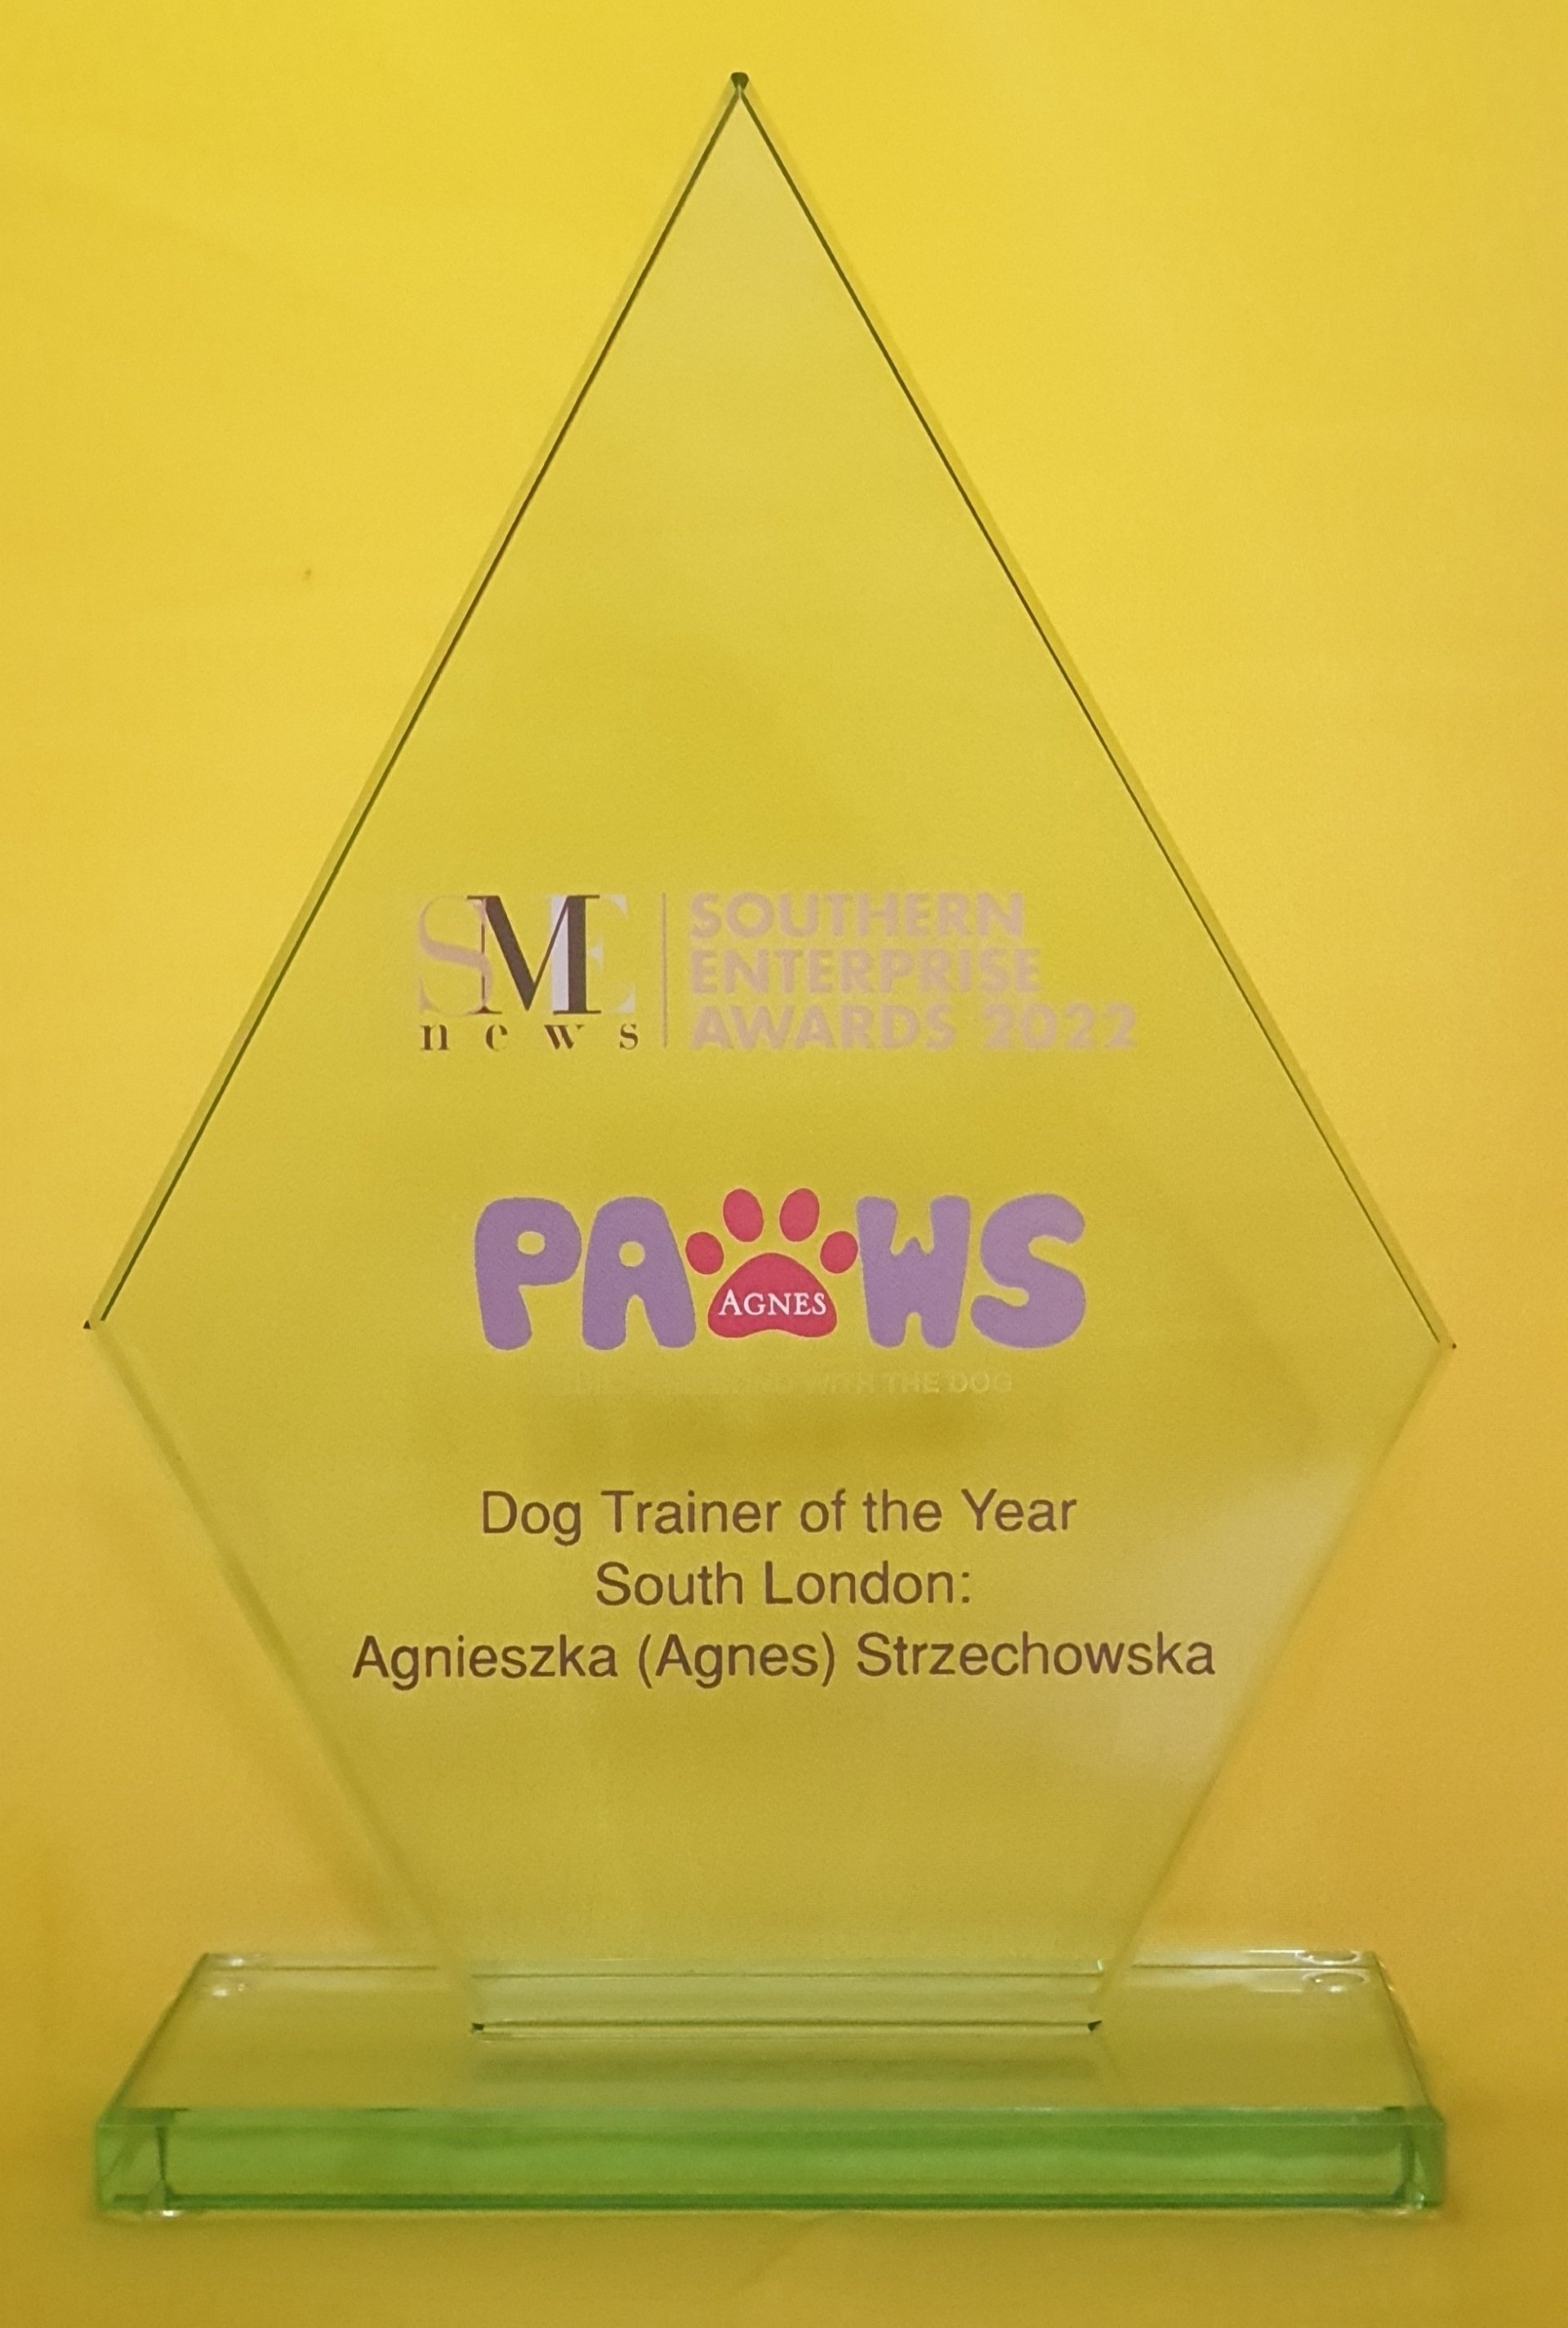 Southern Enterprise Award Trophy for Dog Trainer of the Year South London